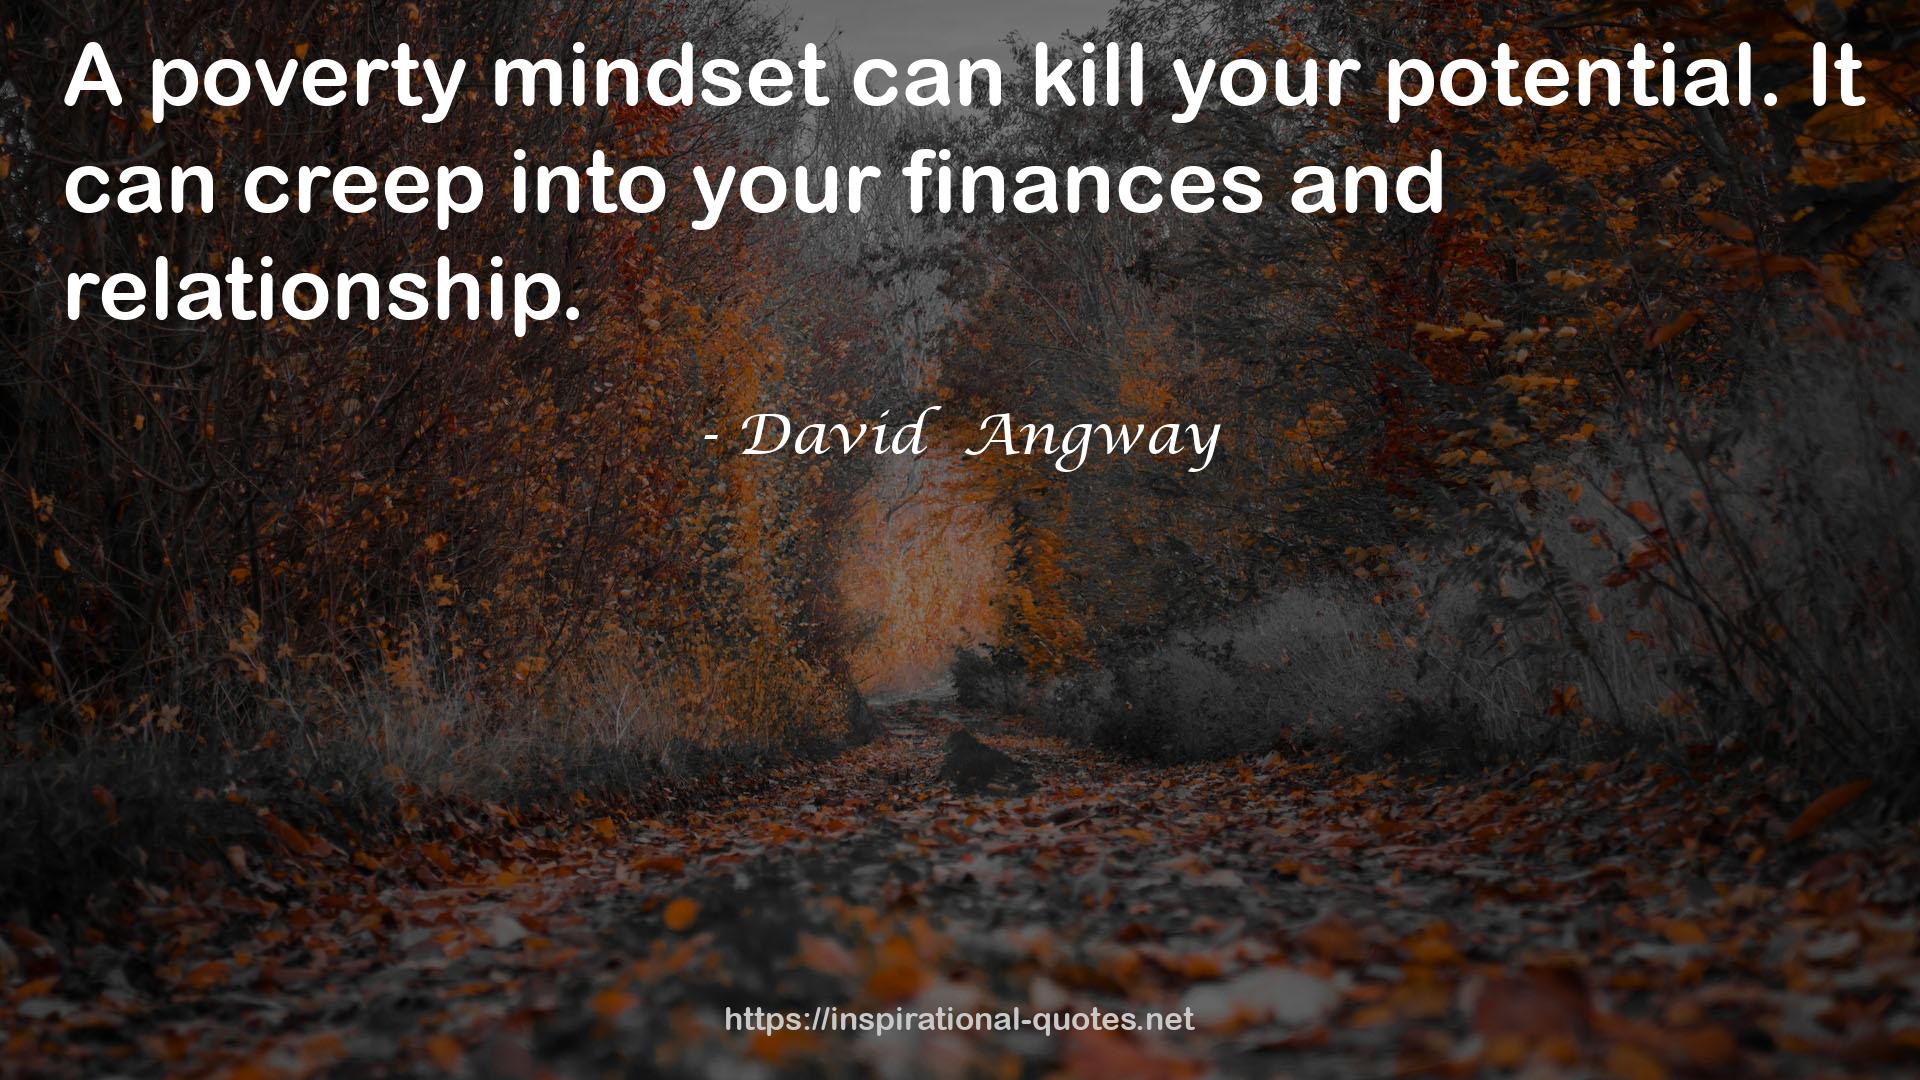 David  Angway QUOTES